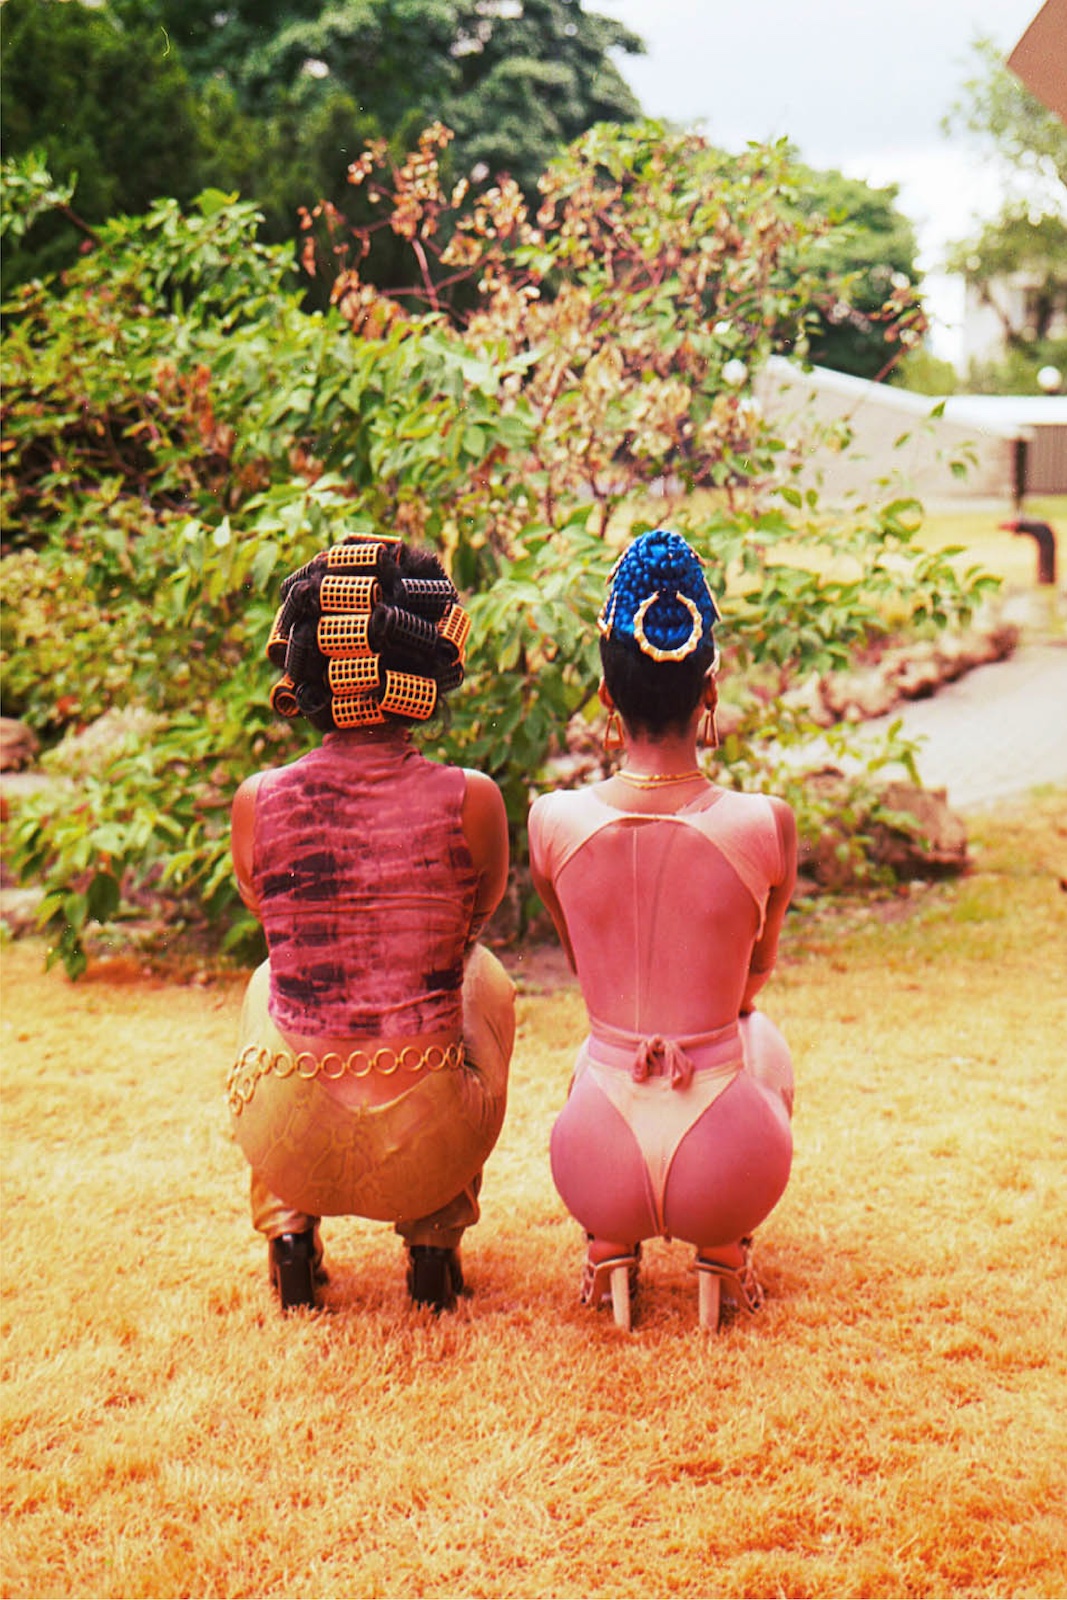 Two women squatting in yard, shown from behind